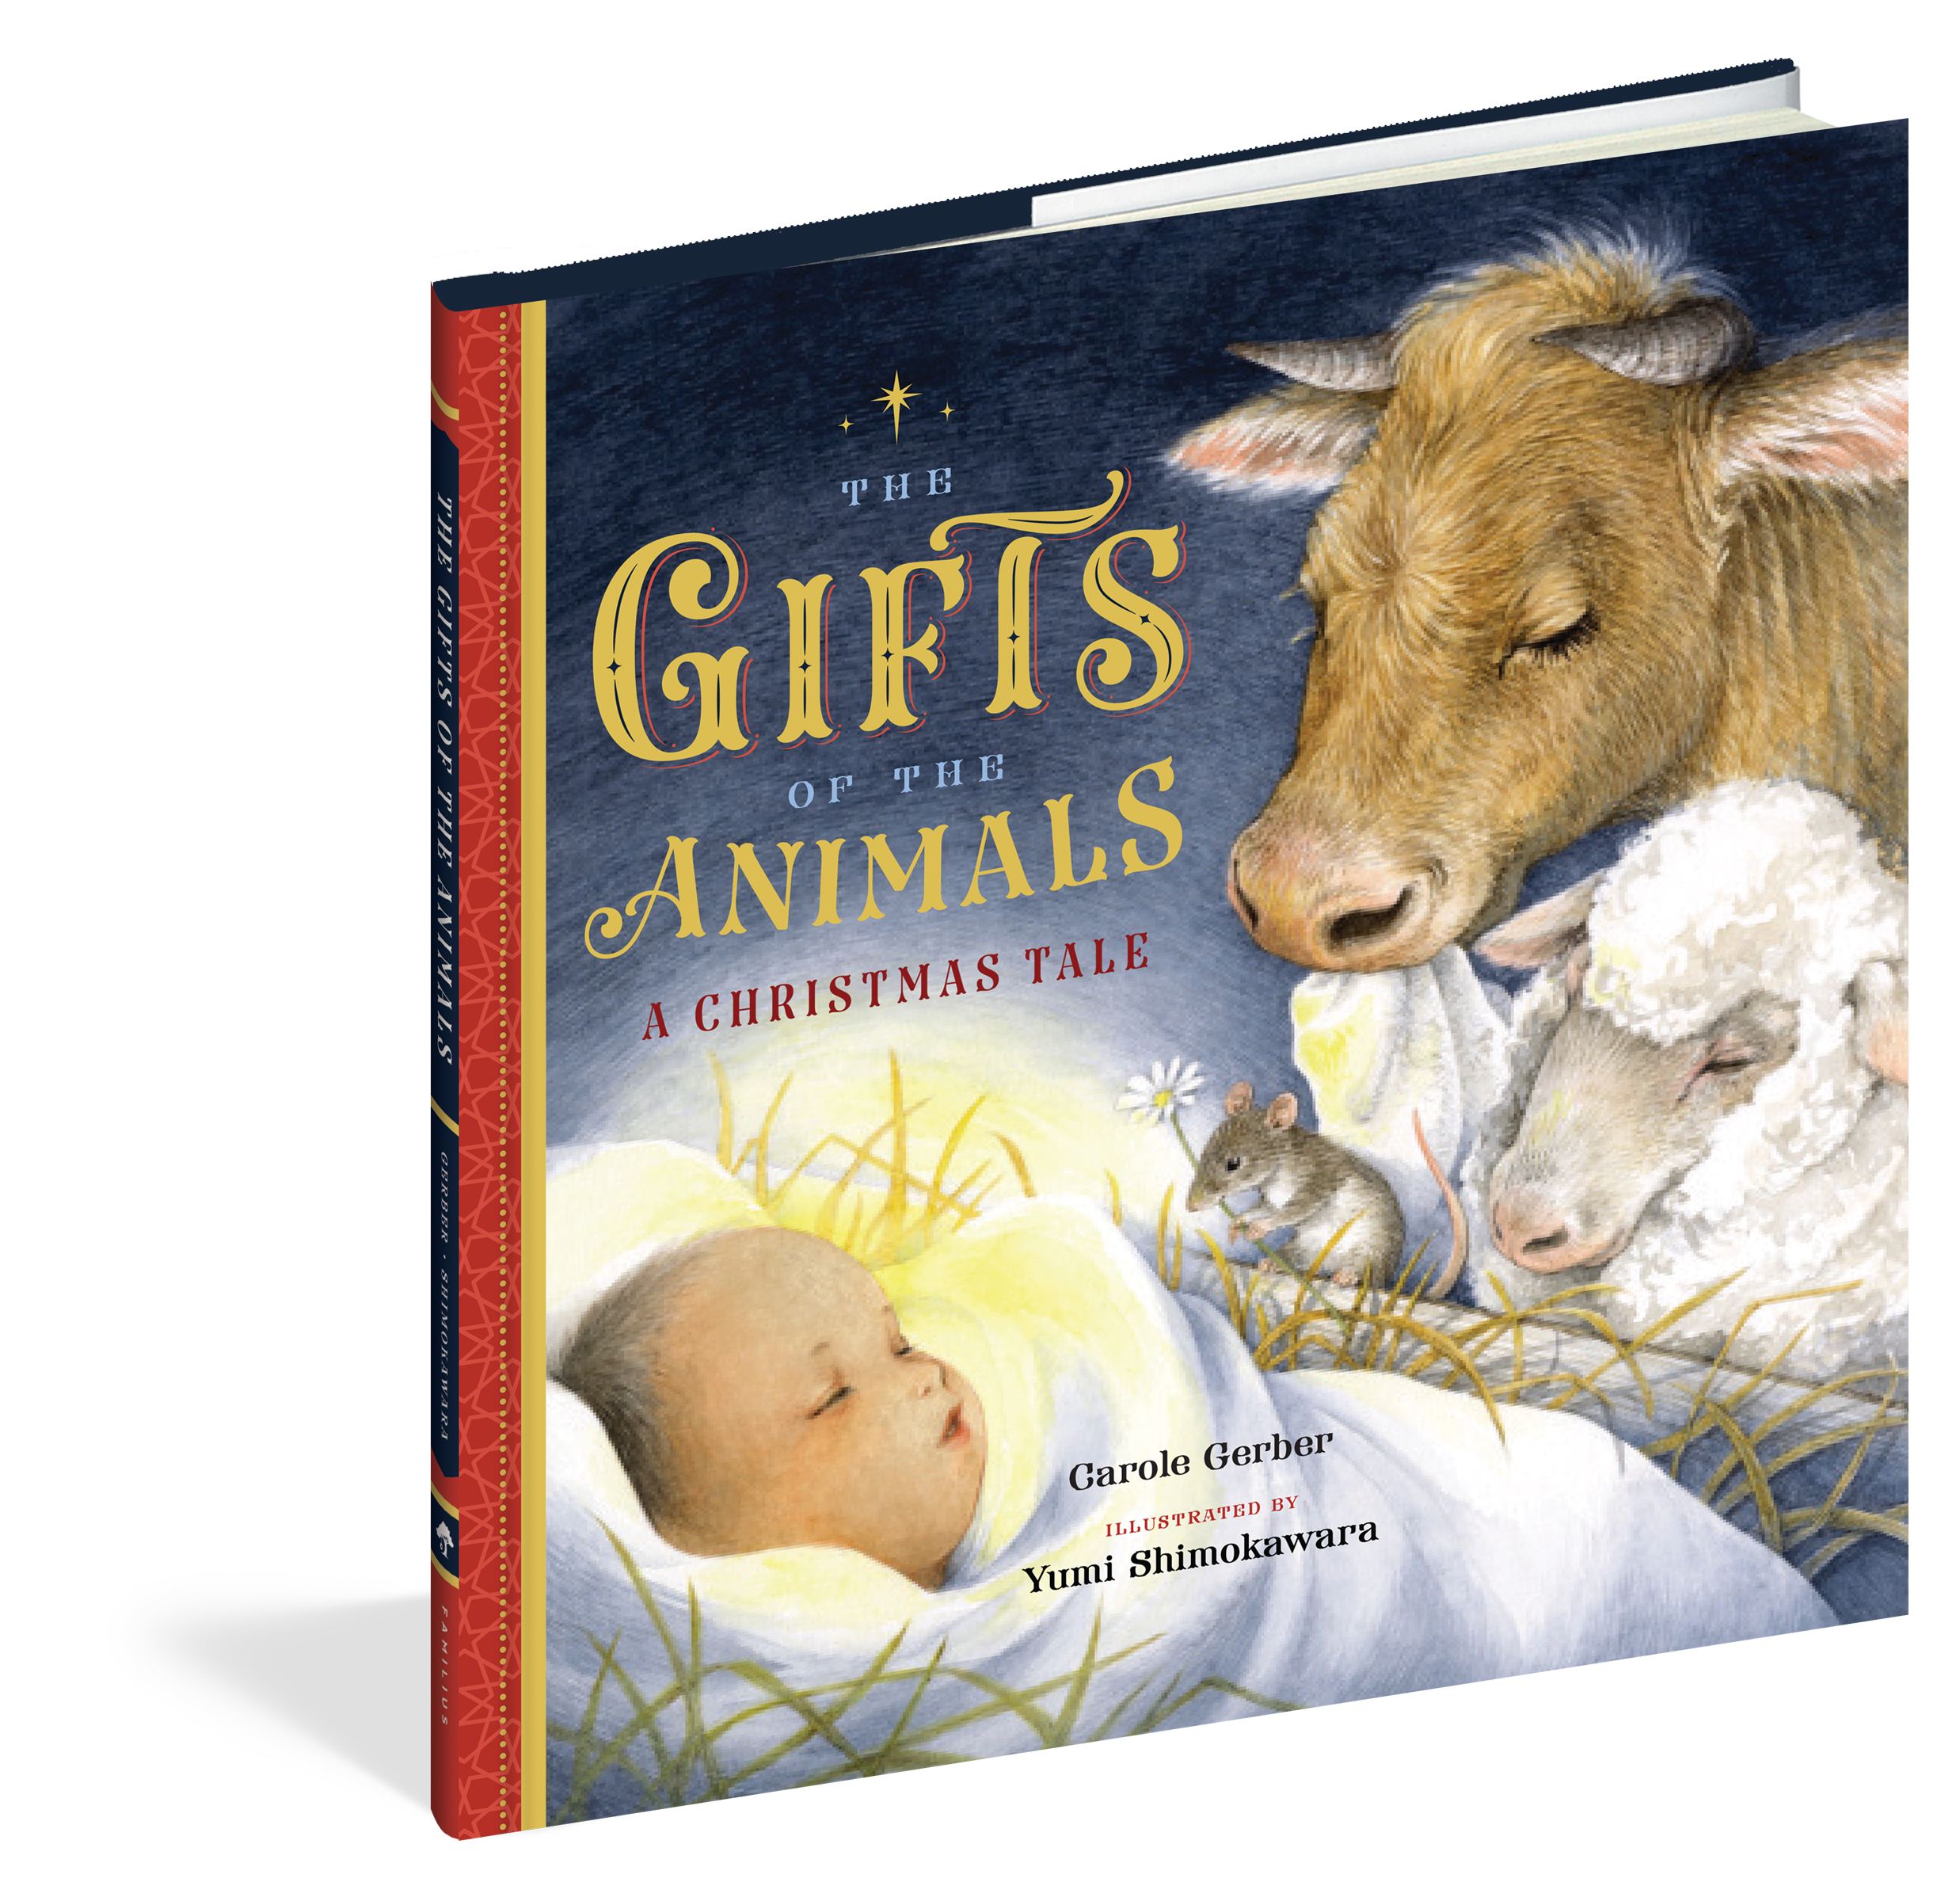 The cover of the picture book The Gifts of the Animals.